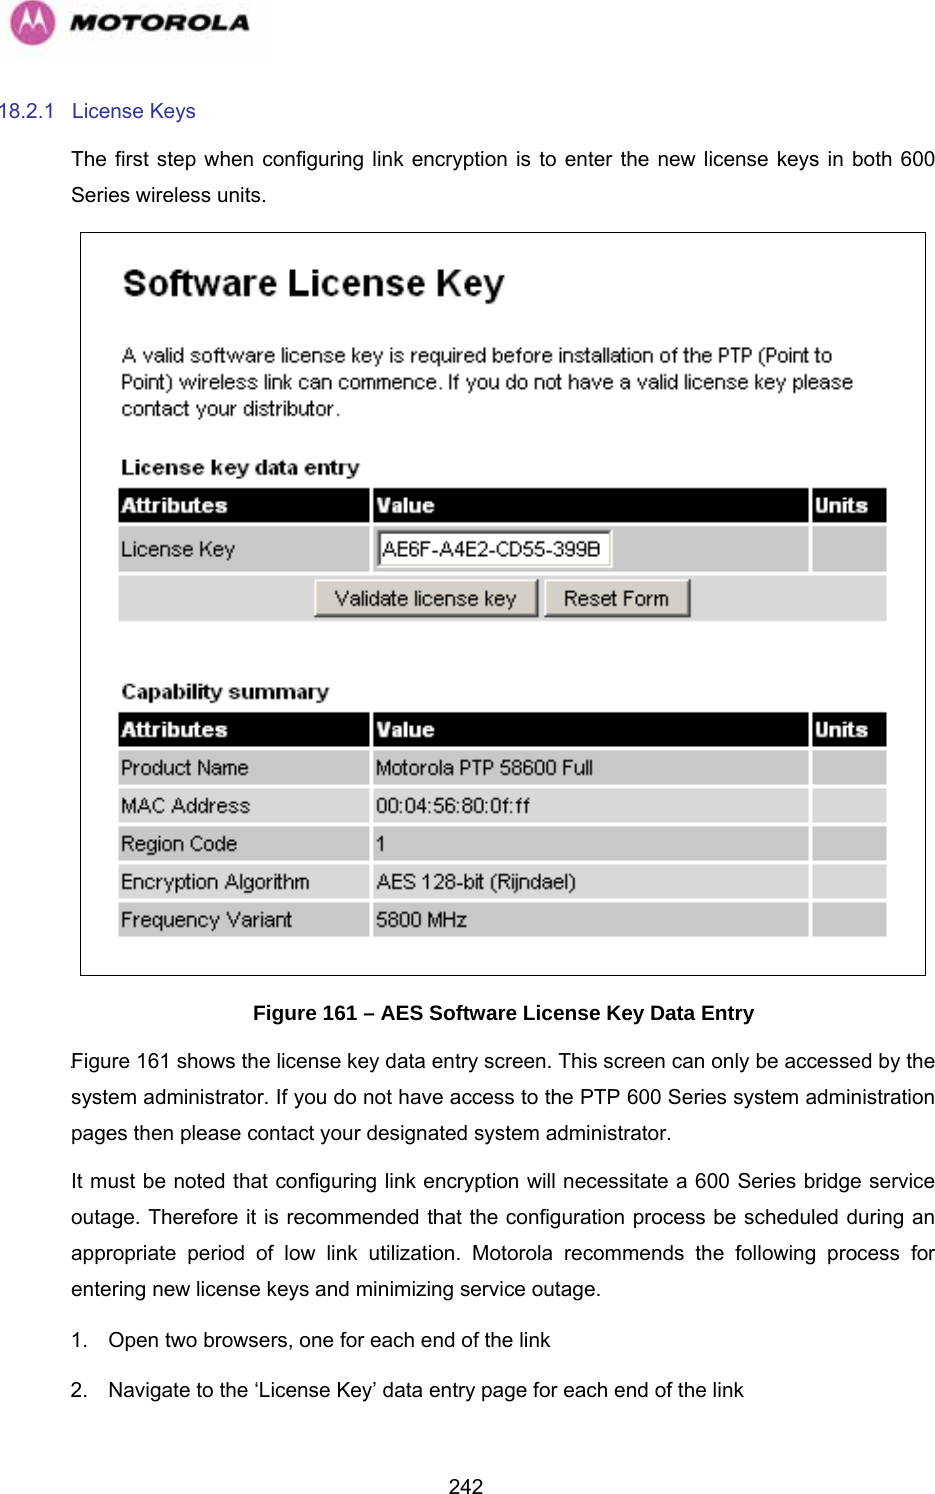   24218.2.1 License Keys The first step when configuring link encryption is to enter the new license keys in both 600 Series wireless units.  Figure 161 – AES Software License Key Data Entry 1245HFigure 161 shows the license key data entry screen. This screen can only be accessed by the system administrator. If you do not have access to the PTP 600 Series system administration pages then please contact your designated system administrator.  It must be noted that configuring link encryption will necessitate a 600 Series bridge service outage. Therefore it is recommended that the configuration process be scheduled during an appropriate period of low link utilization. Motorola recommends the following process for entering new license keys and minimizing service outage. 1.  Open two browsers, one for each end of the link 2.  Navigate to the ‘License Key’ data entry page for each end of the link 